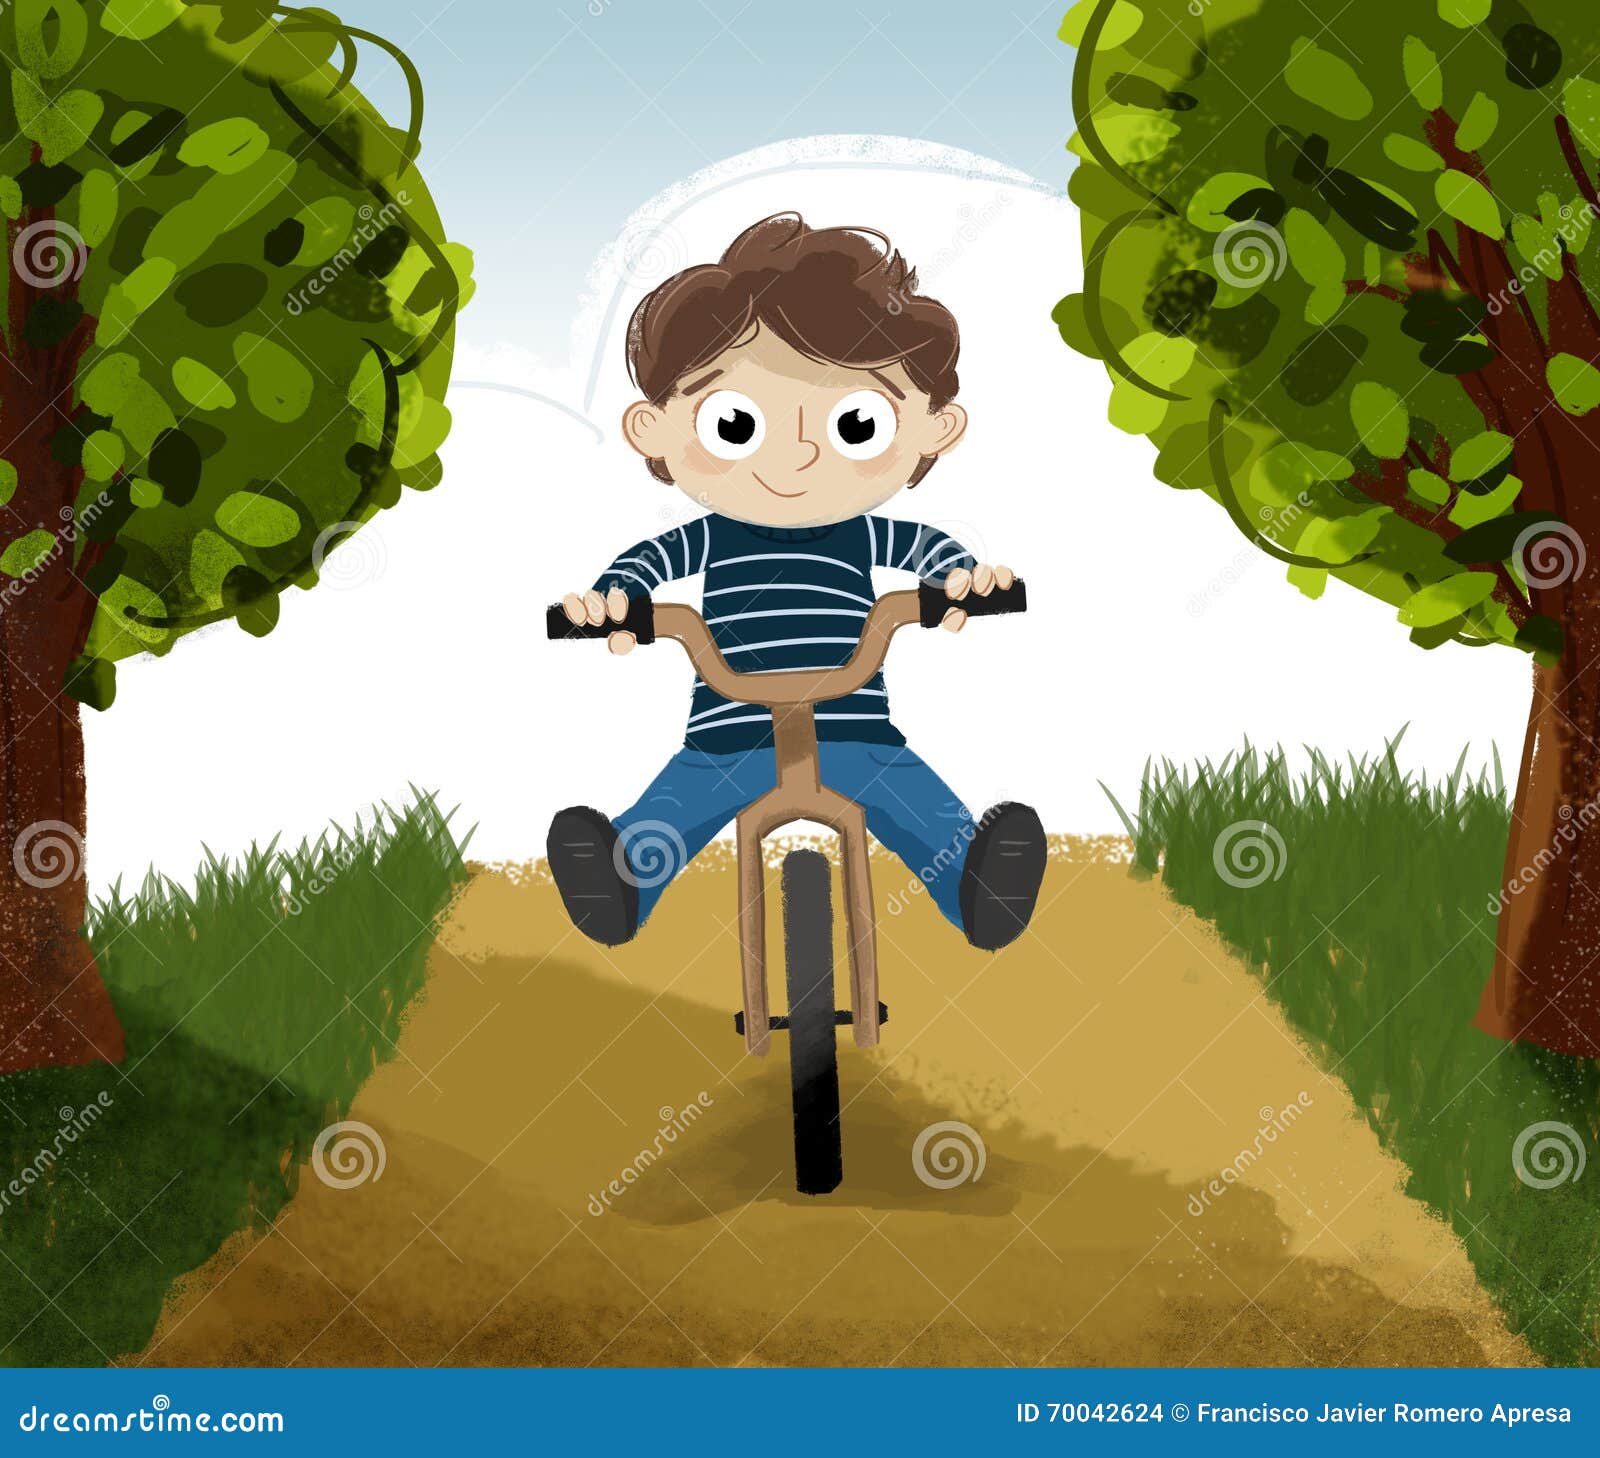 child riding on a bicycle